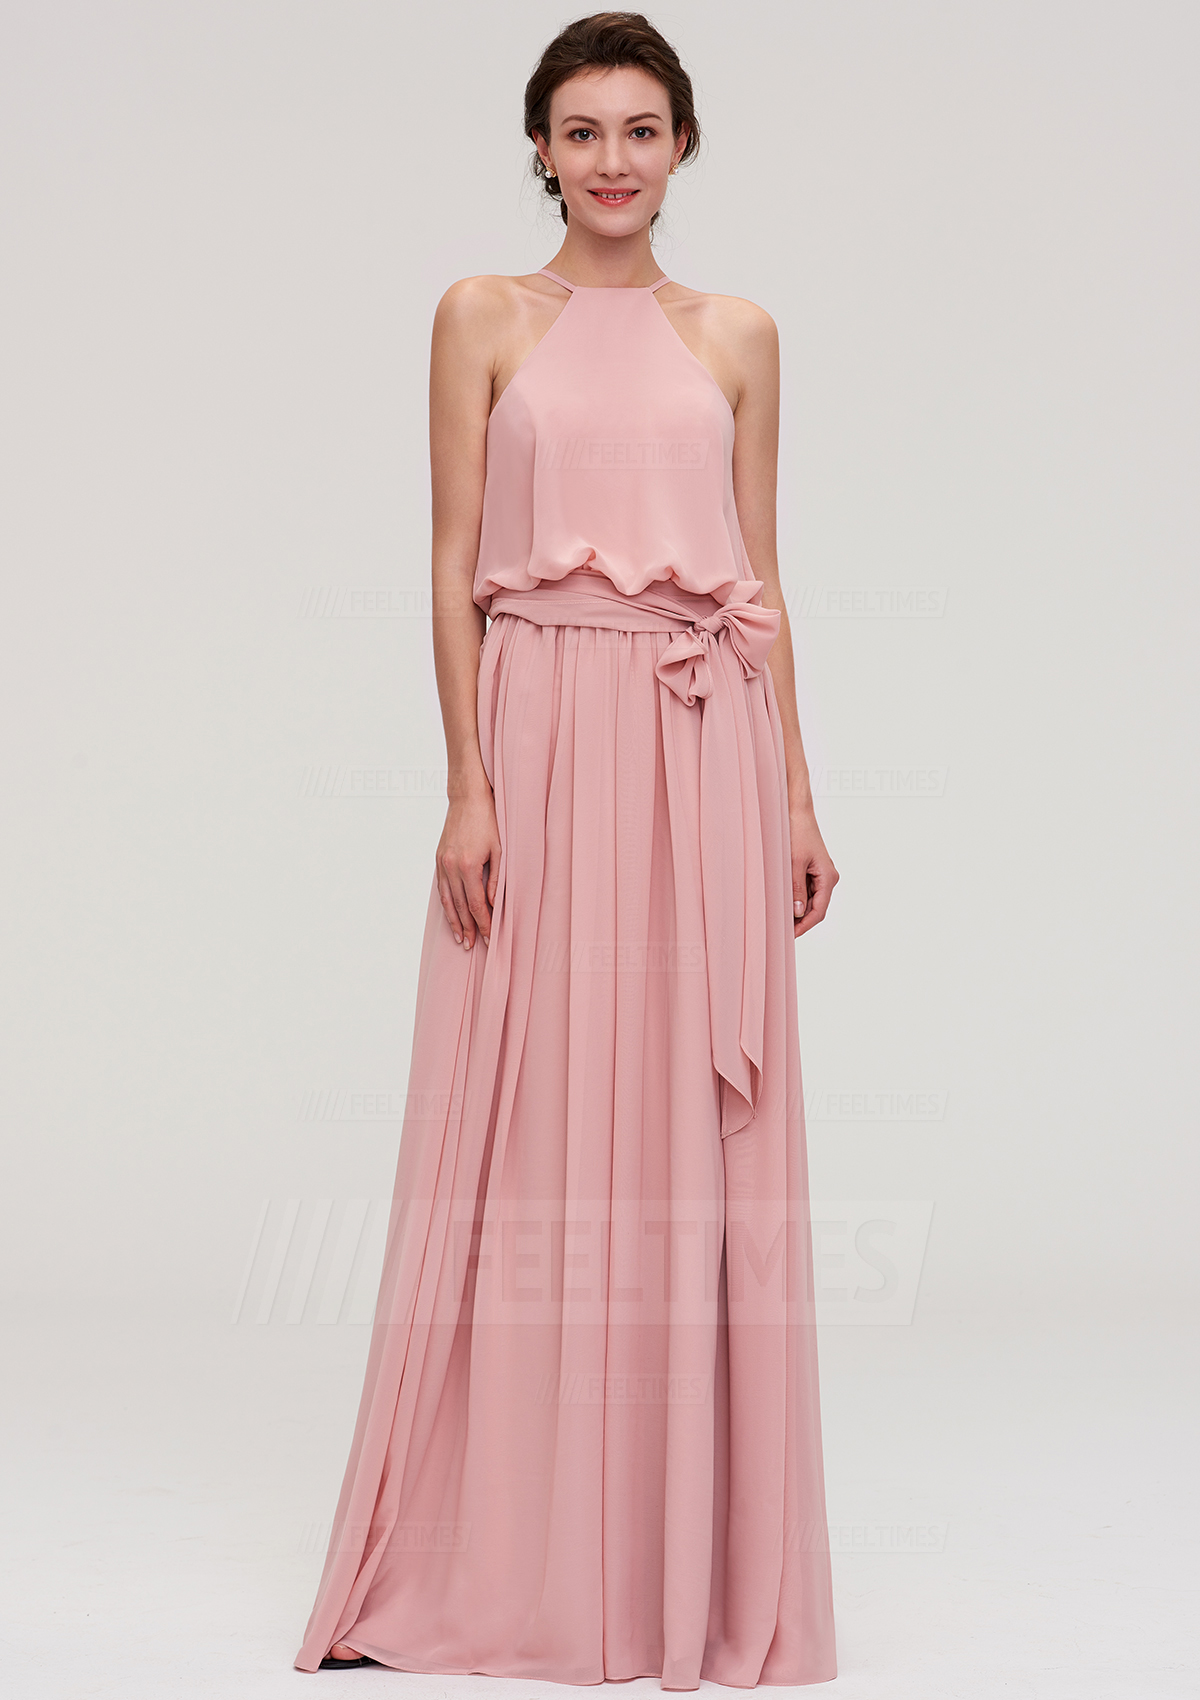 A-Line/Princess Scoop Neck Sleeveless Long/Floor-Length Chiffon Bridesmaid Dress With Pleated Sashes
